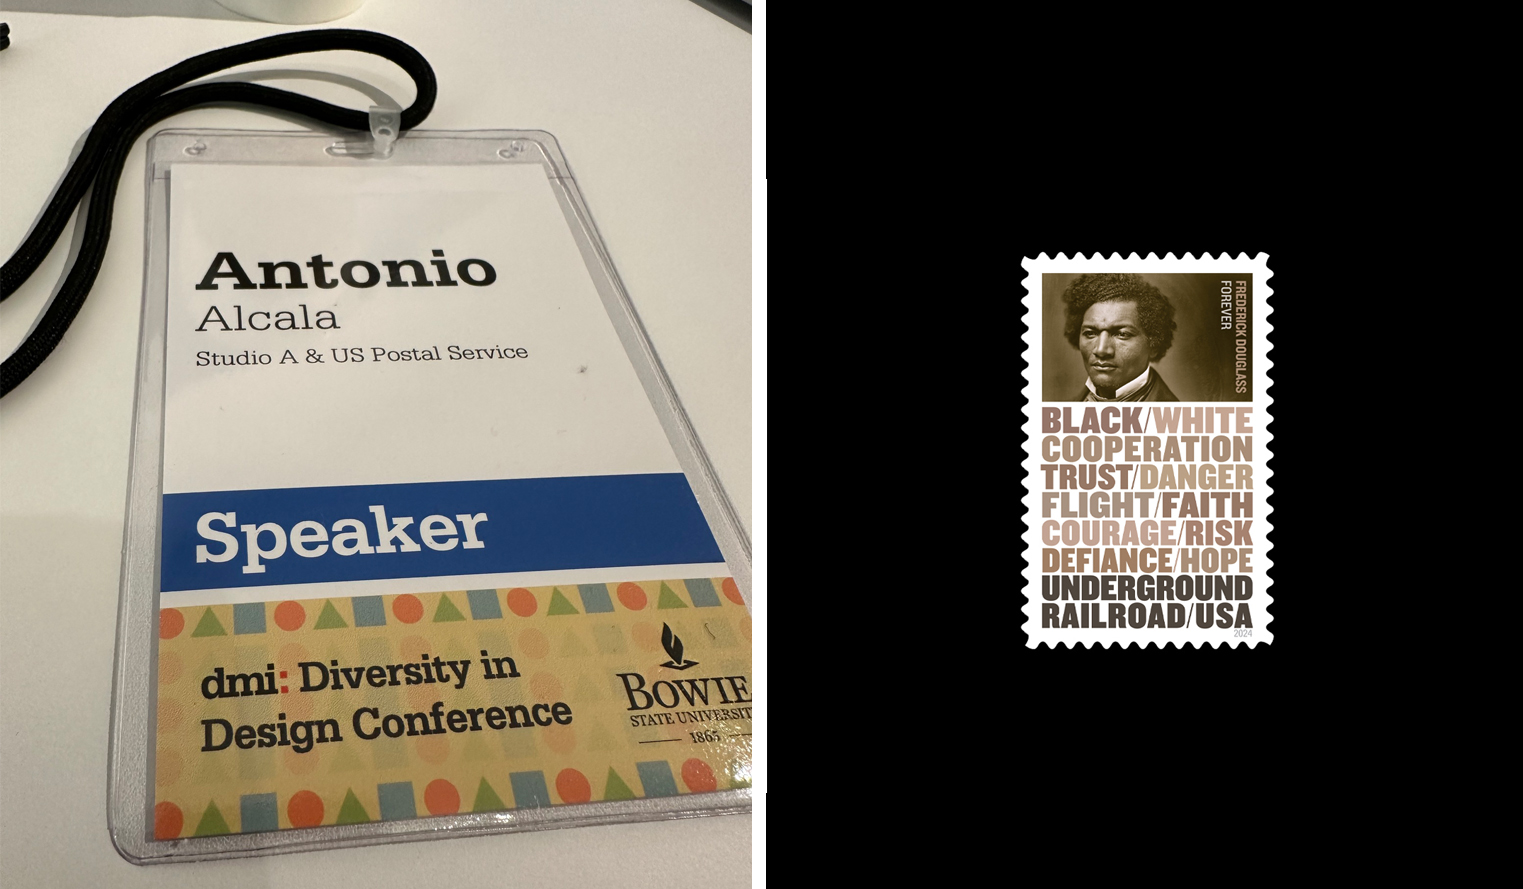 Antonio's speaker badge for the Diversity in Design Conference and the Frederick Douglass stamp from the Underground Railroad stamps on which he spoke about